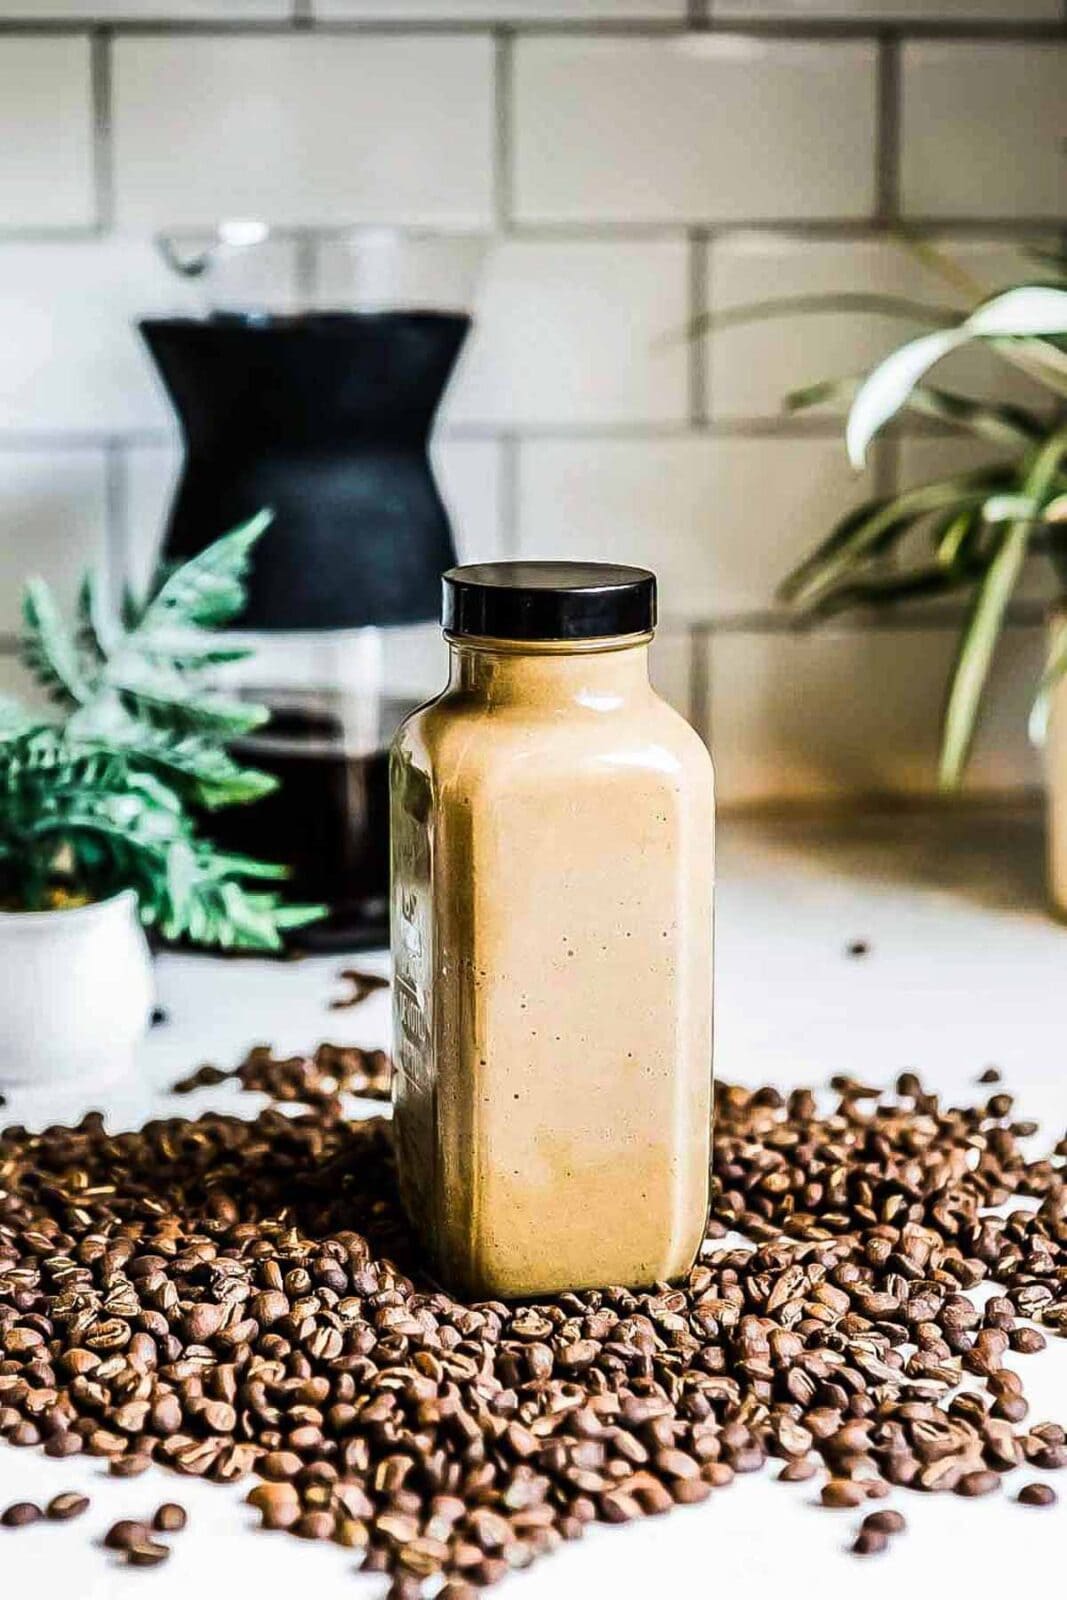 Mocha coffee smoothie is an energizing weight loss snack